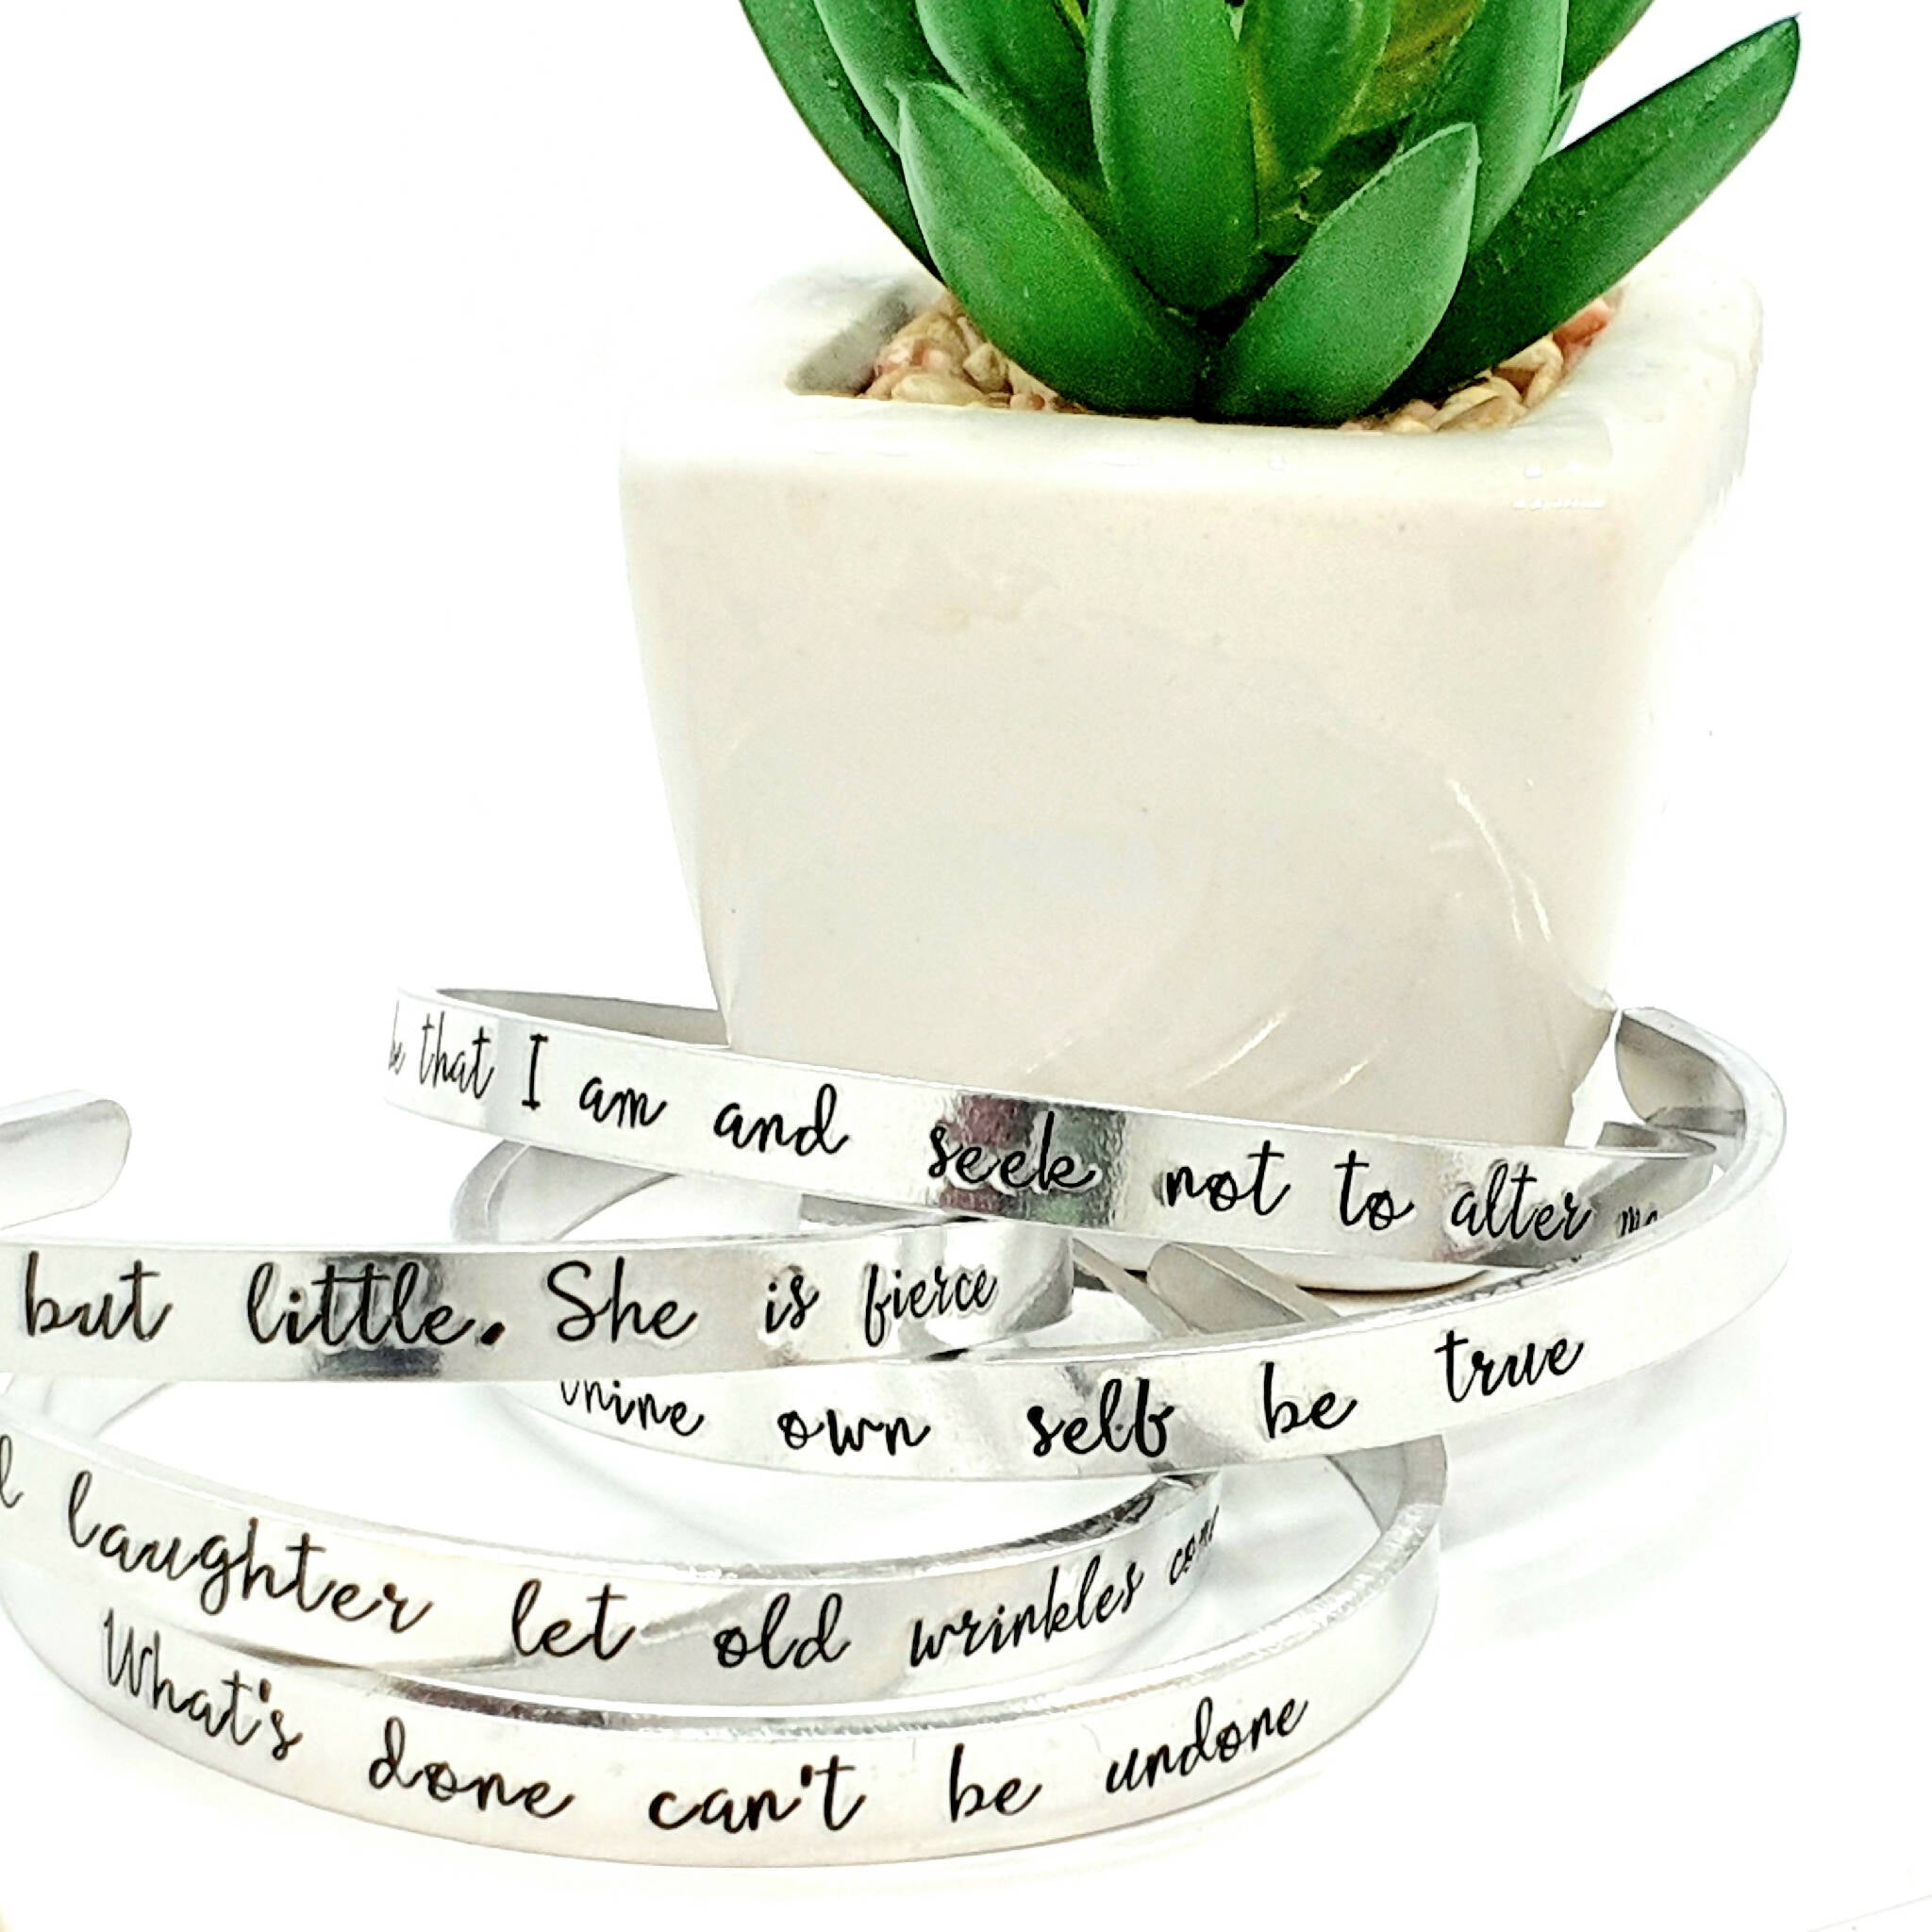 The Merchant of Venice 'With Mirth and Laughter Let Old Wrinkles Come' Aluminium Quote Cuff